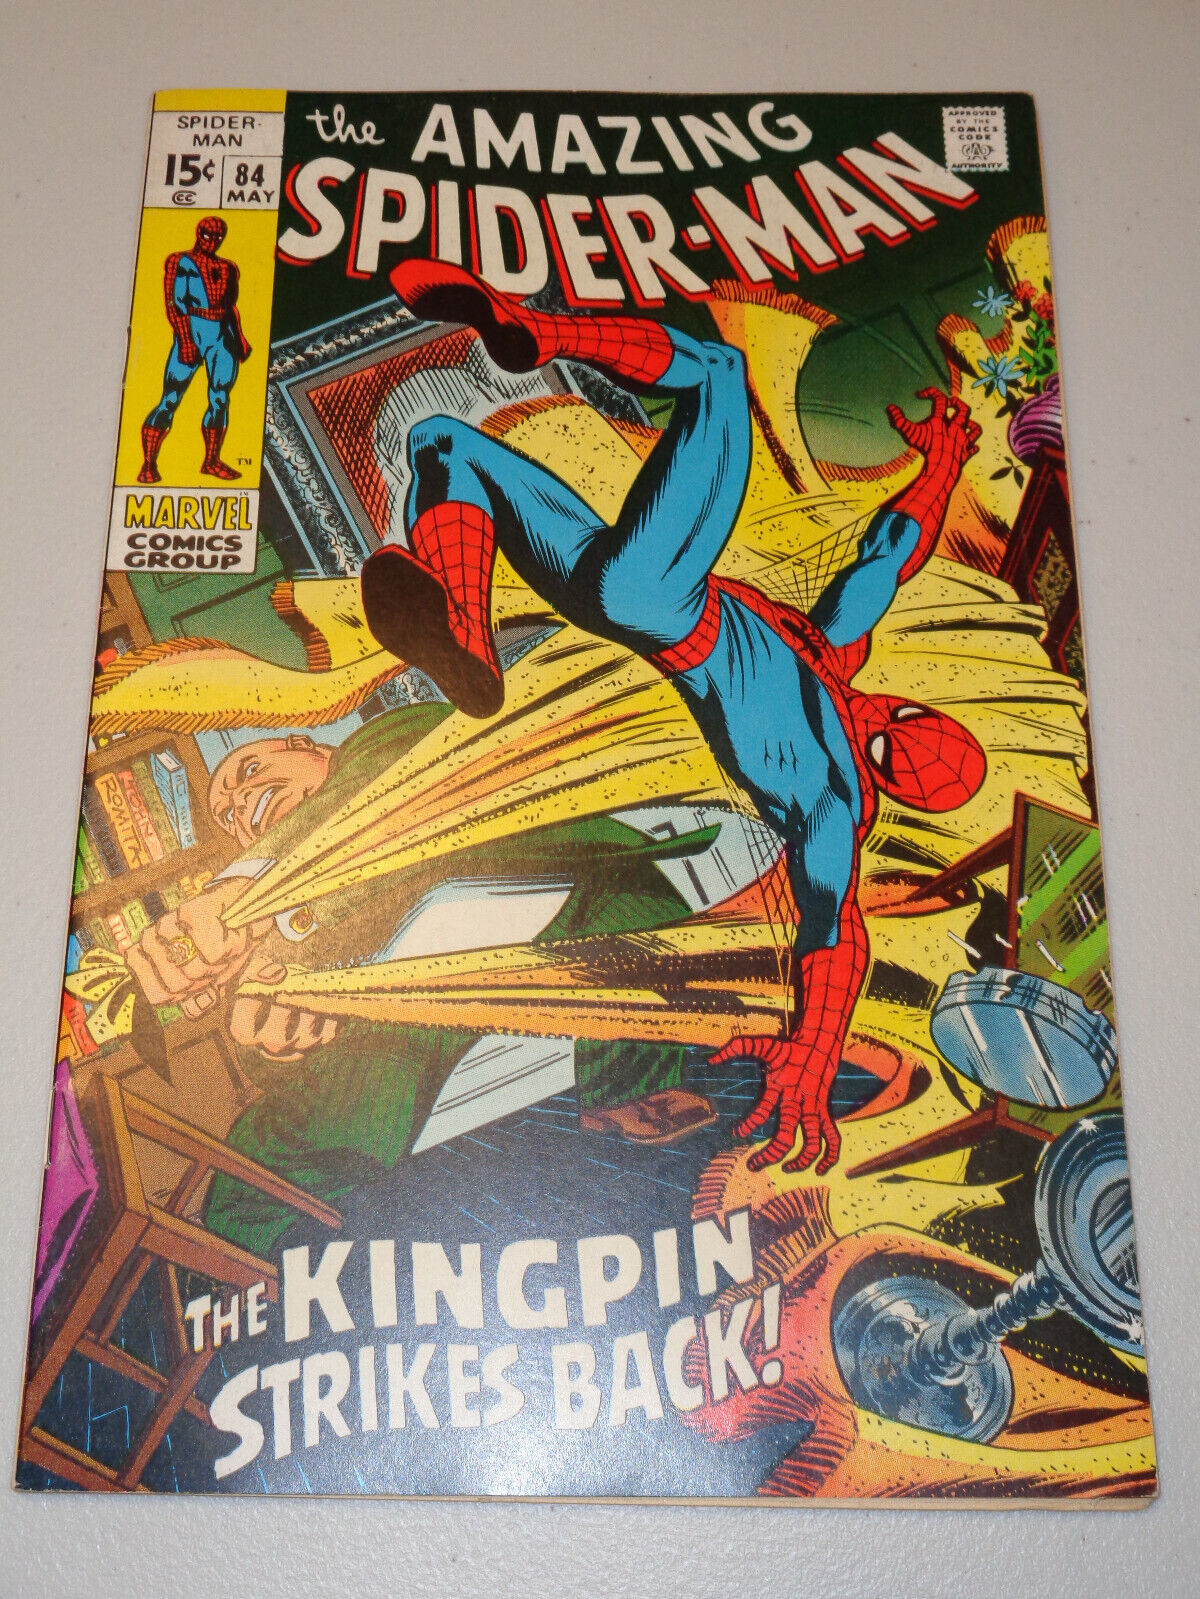 AMAZING SPIDER-MAN #84 (1970 ; Classic Kingpin Cover ; Superb VF+ or Better)